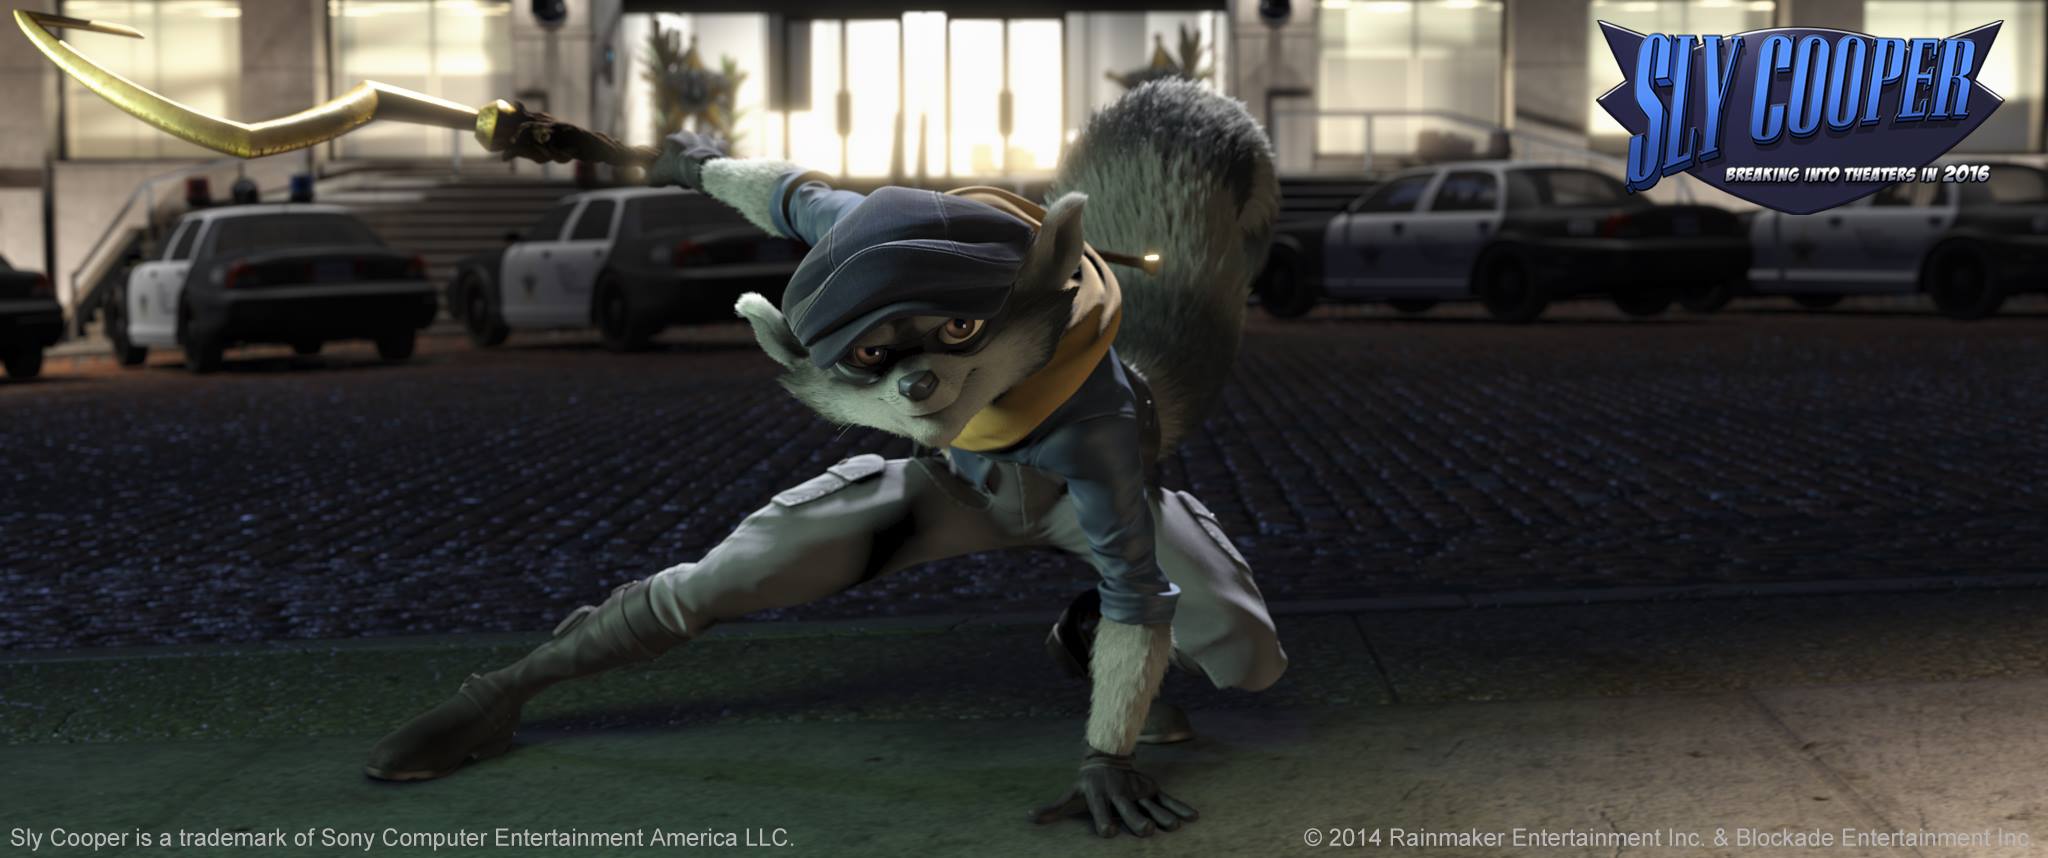 http://ps4n.ru/wp-content/uploads/2014/01/1390899826-sly-cooper-2.jpg